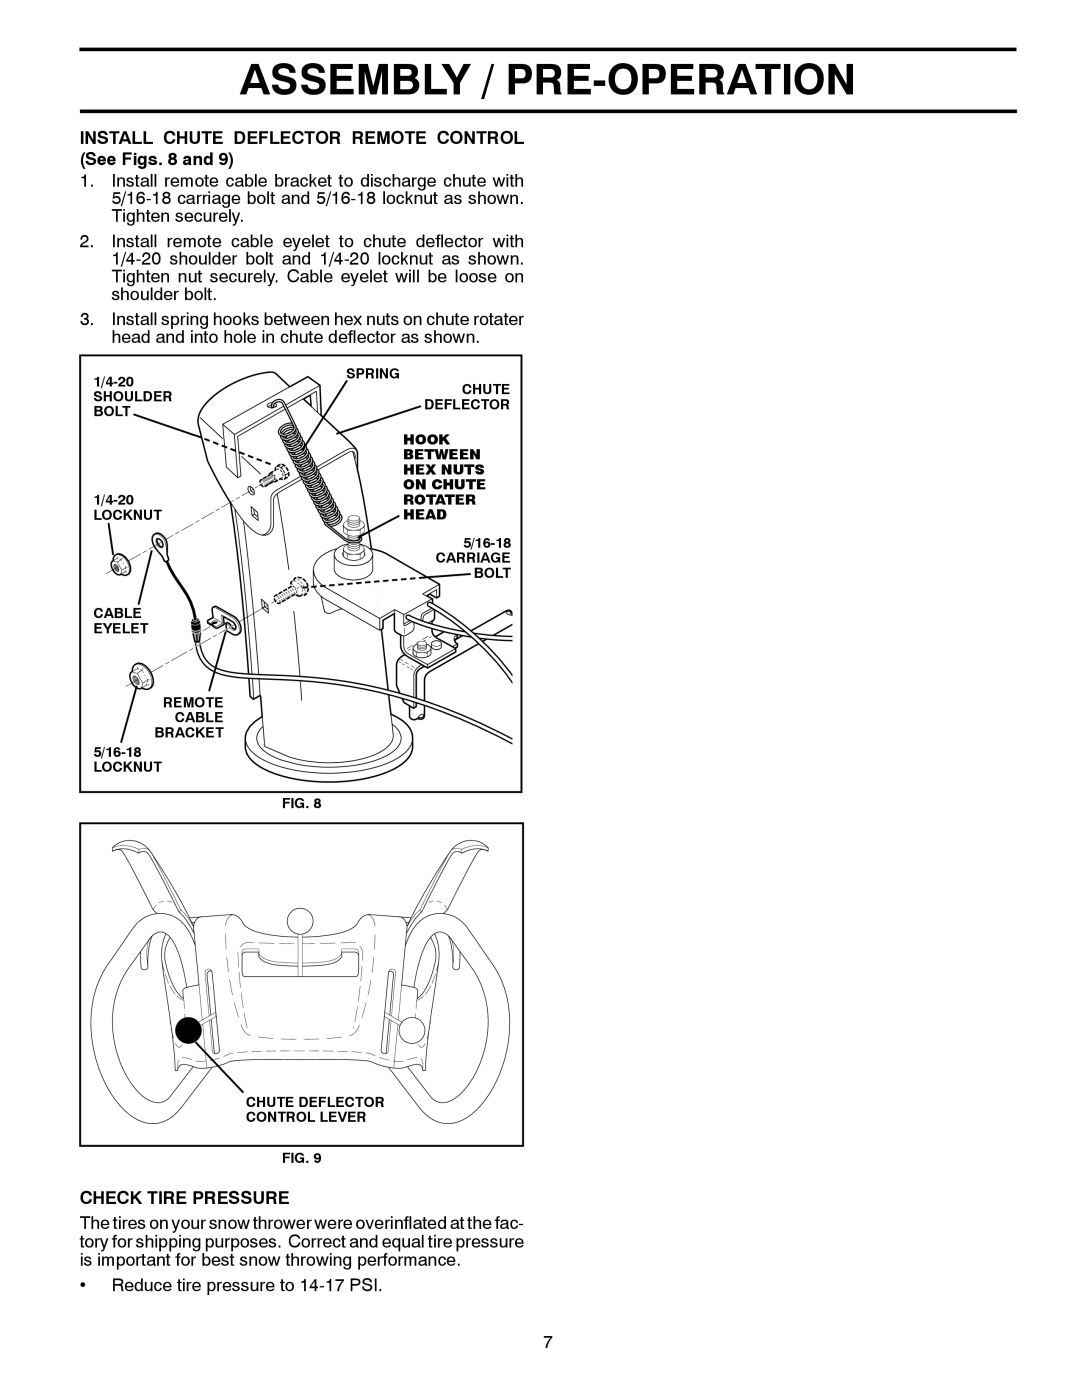 Husqvarna 924HV Assembly / Pre-Operation, INSTALL CHUTE DEFLECTOR REMOTE CONTROL See Figs. 8 and, Check Tire Pressure 